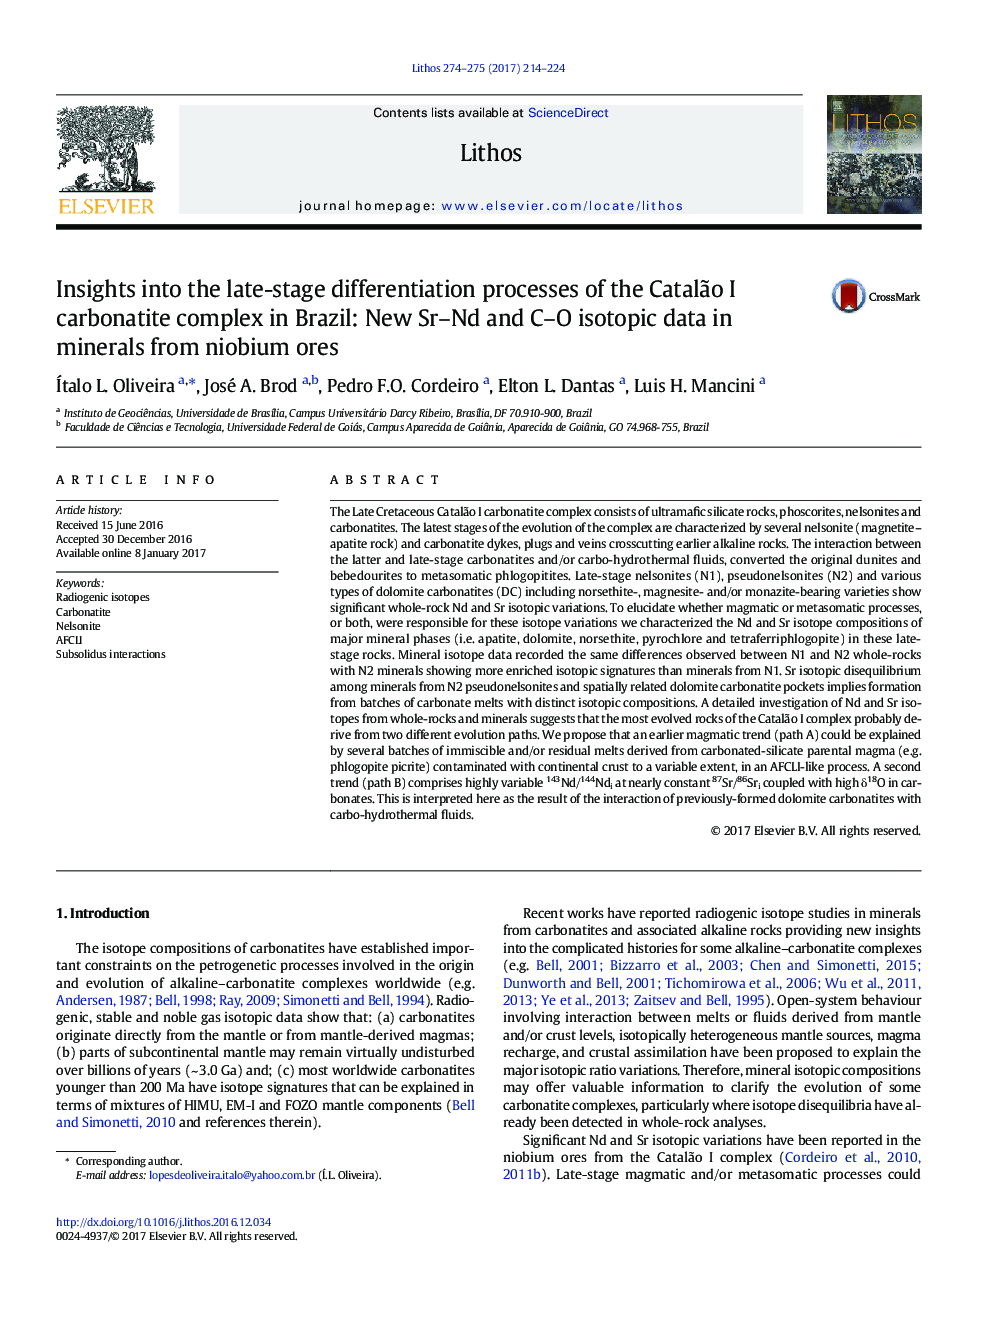 Insights into the late-stage differentiation processes of the CatalÃ£o I carbonatite complex in Brazil: New Sr-Nd and C-O isotopic data in minerals from niobium ores